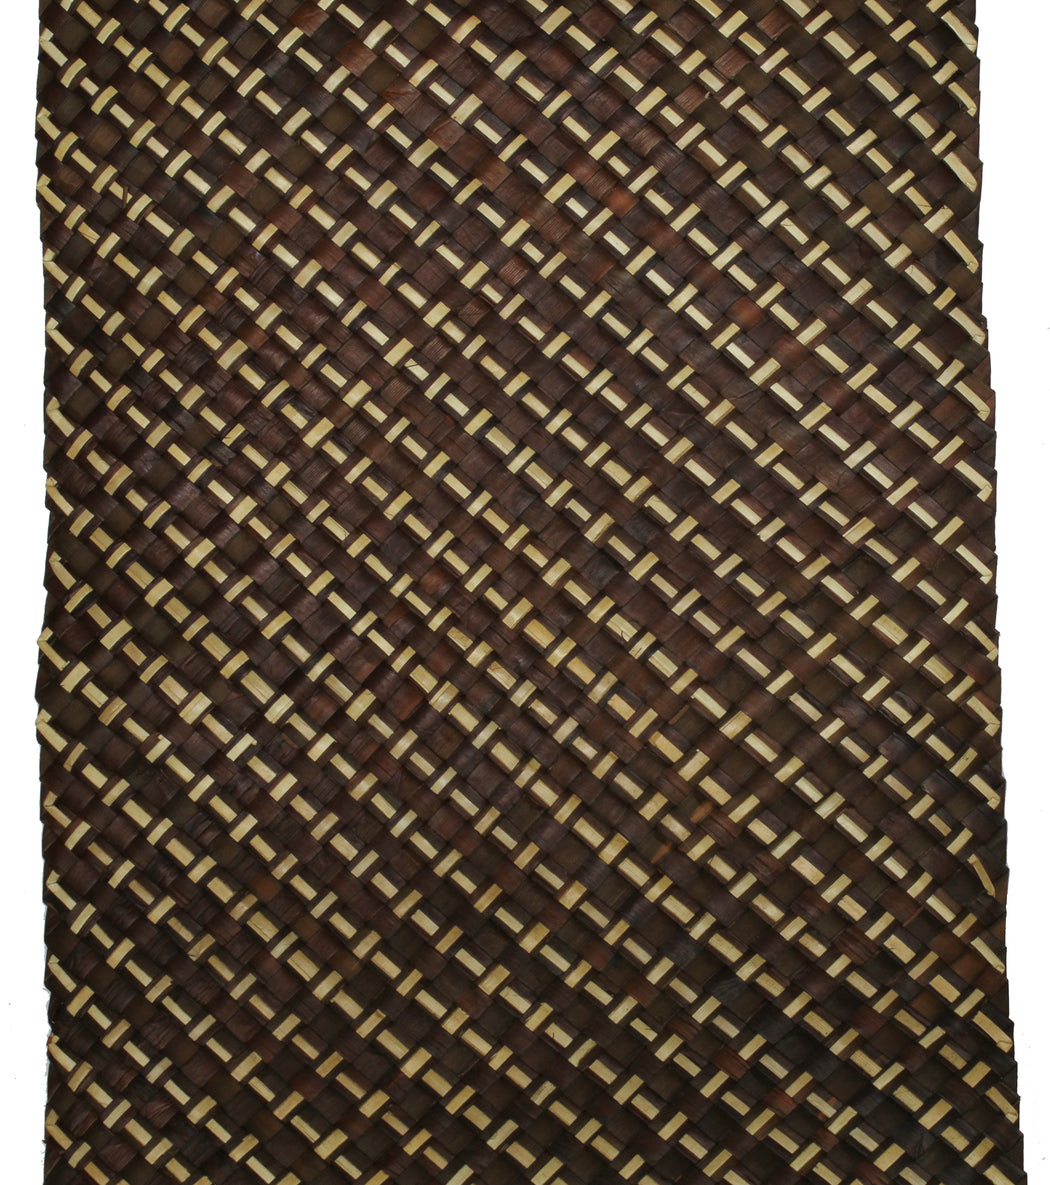 Table Runner Handwoven from Pandan Straw - Brown/Natural - Niger Bend